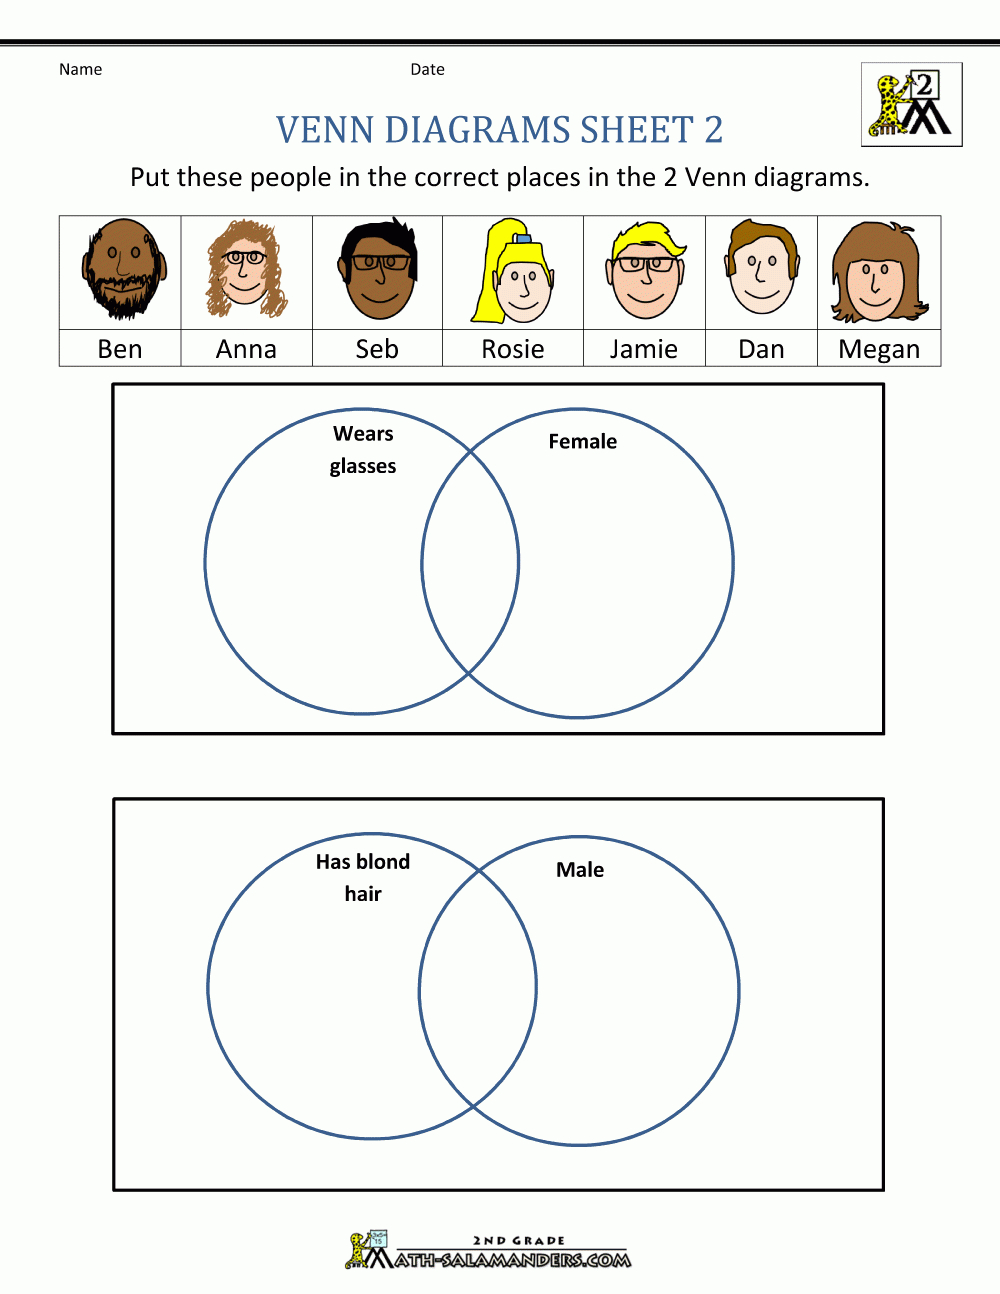 Venn Diagrams Worksheets With Answers Db Excelcom Venn Diagram Questions For Grade 3 Aflam 